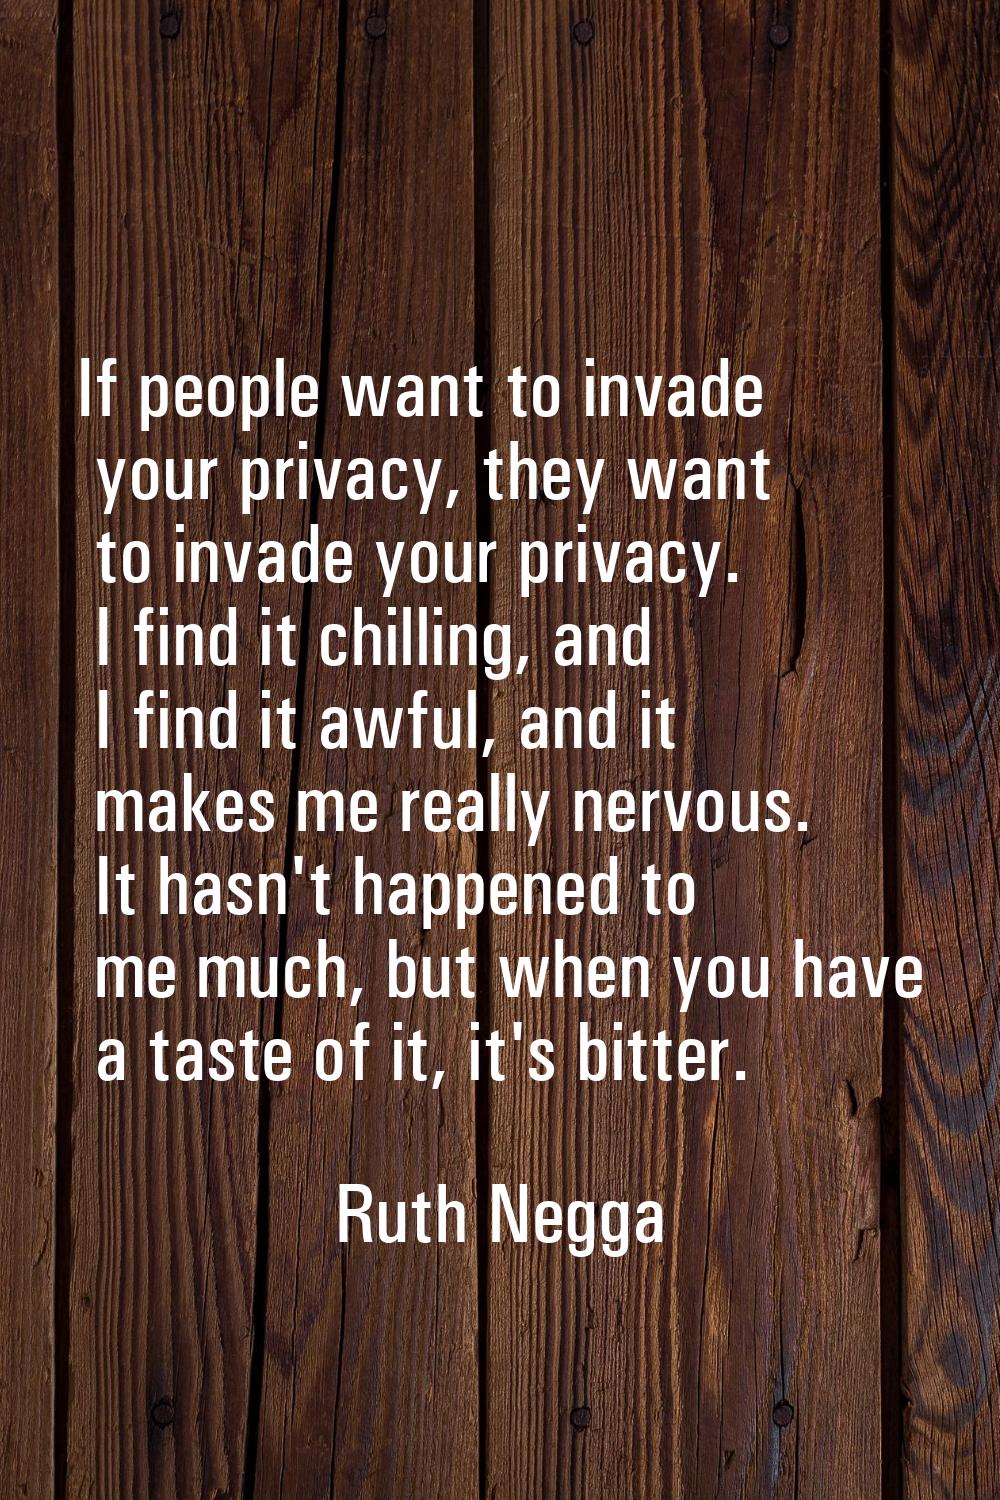 If people want to invade your privacy, they want to invade your privacy. I find it chilling, and I 